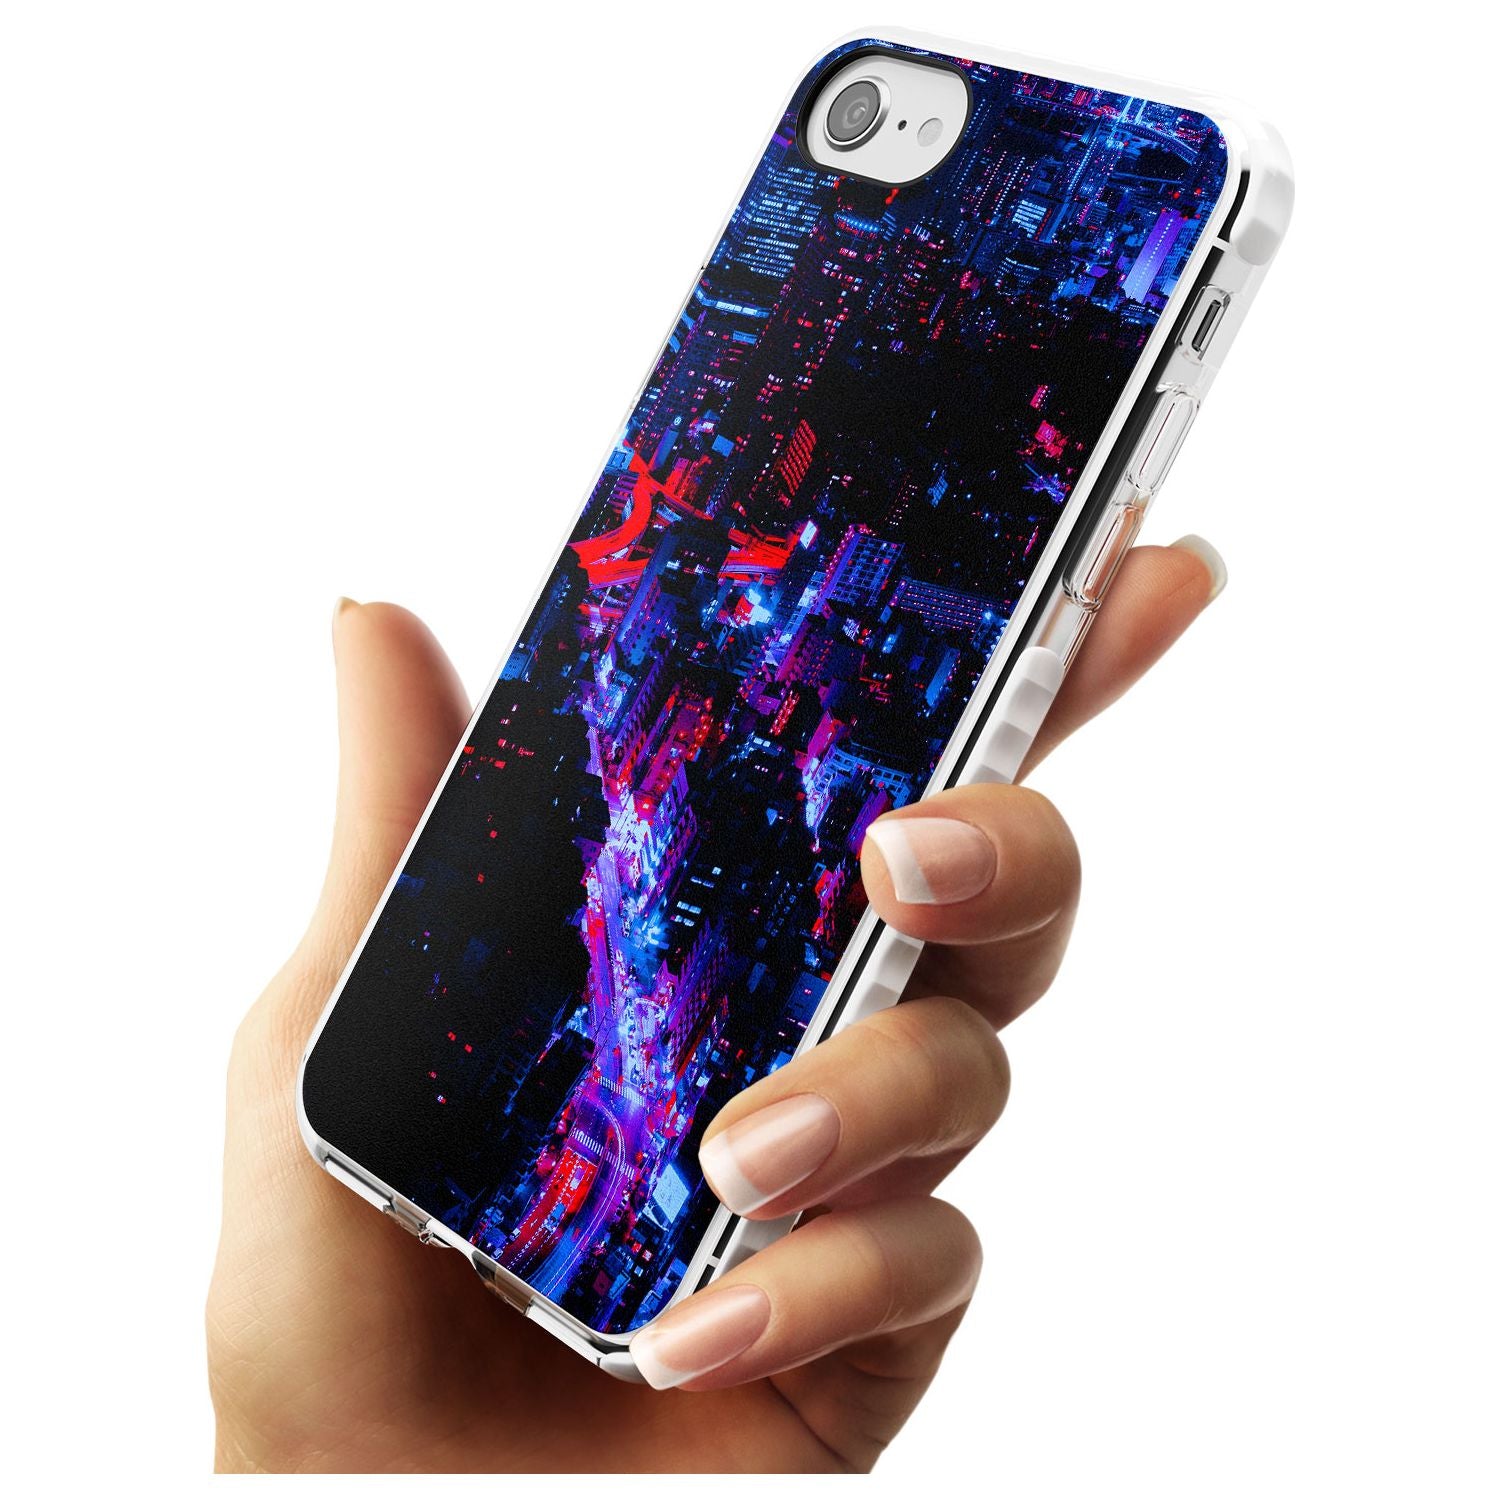 Arial City View - Neon Cities Photographs Impact Phone Case for iPhone SE 8 7 Plus